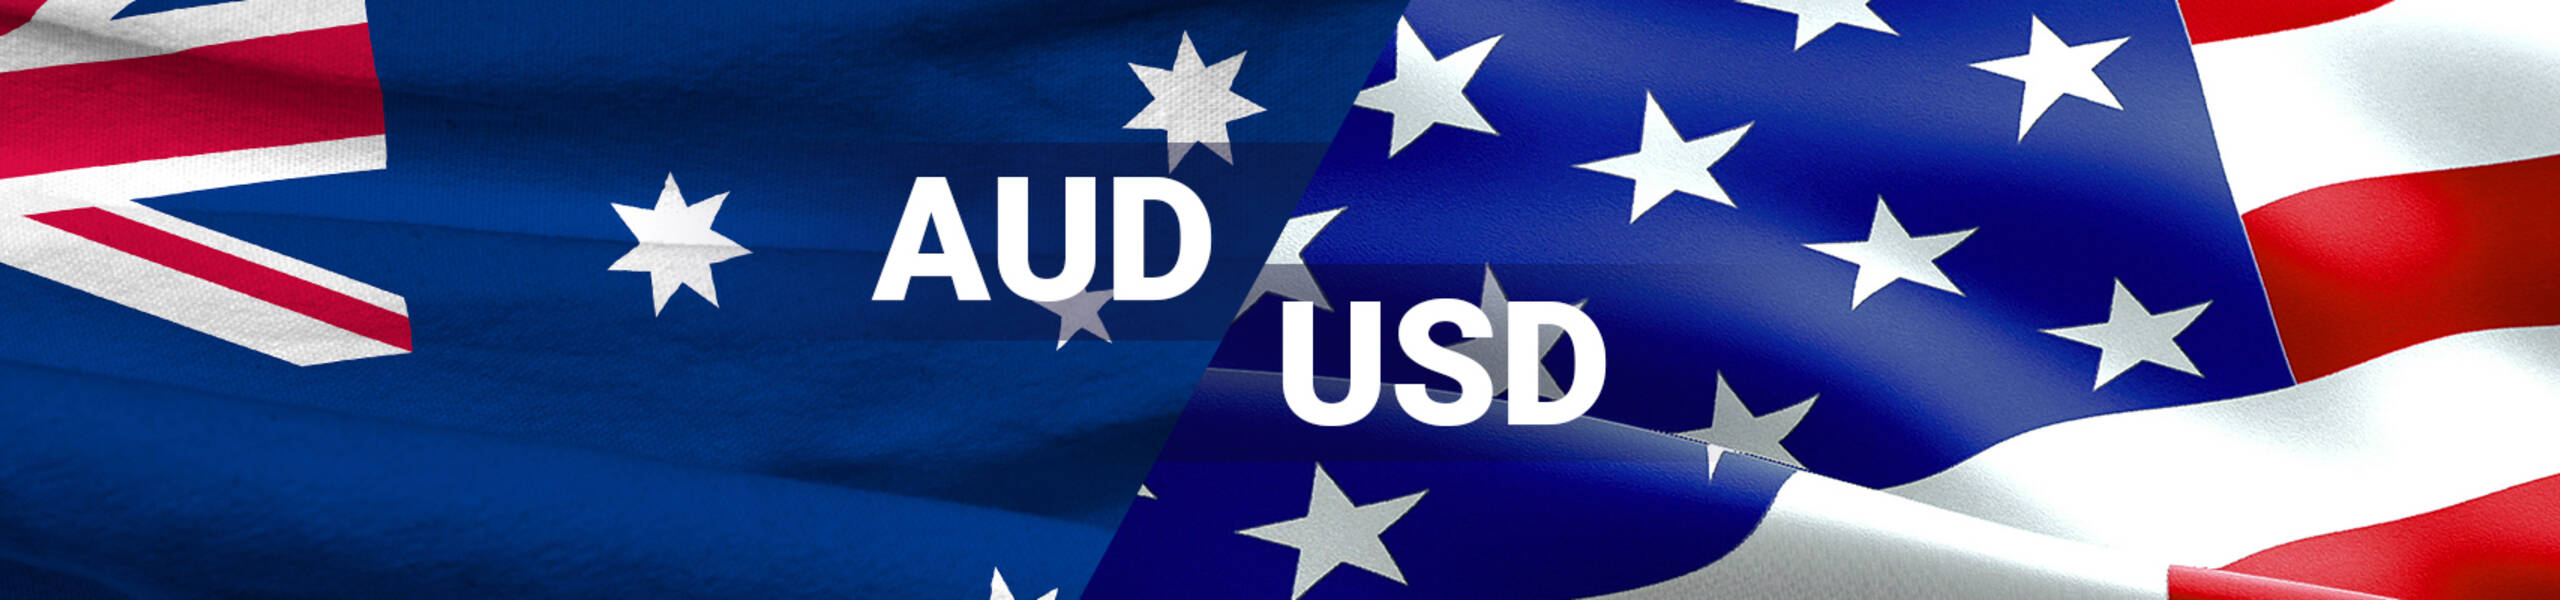 AUD/USD: aussie in correction to Cloud